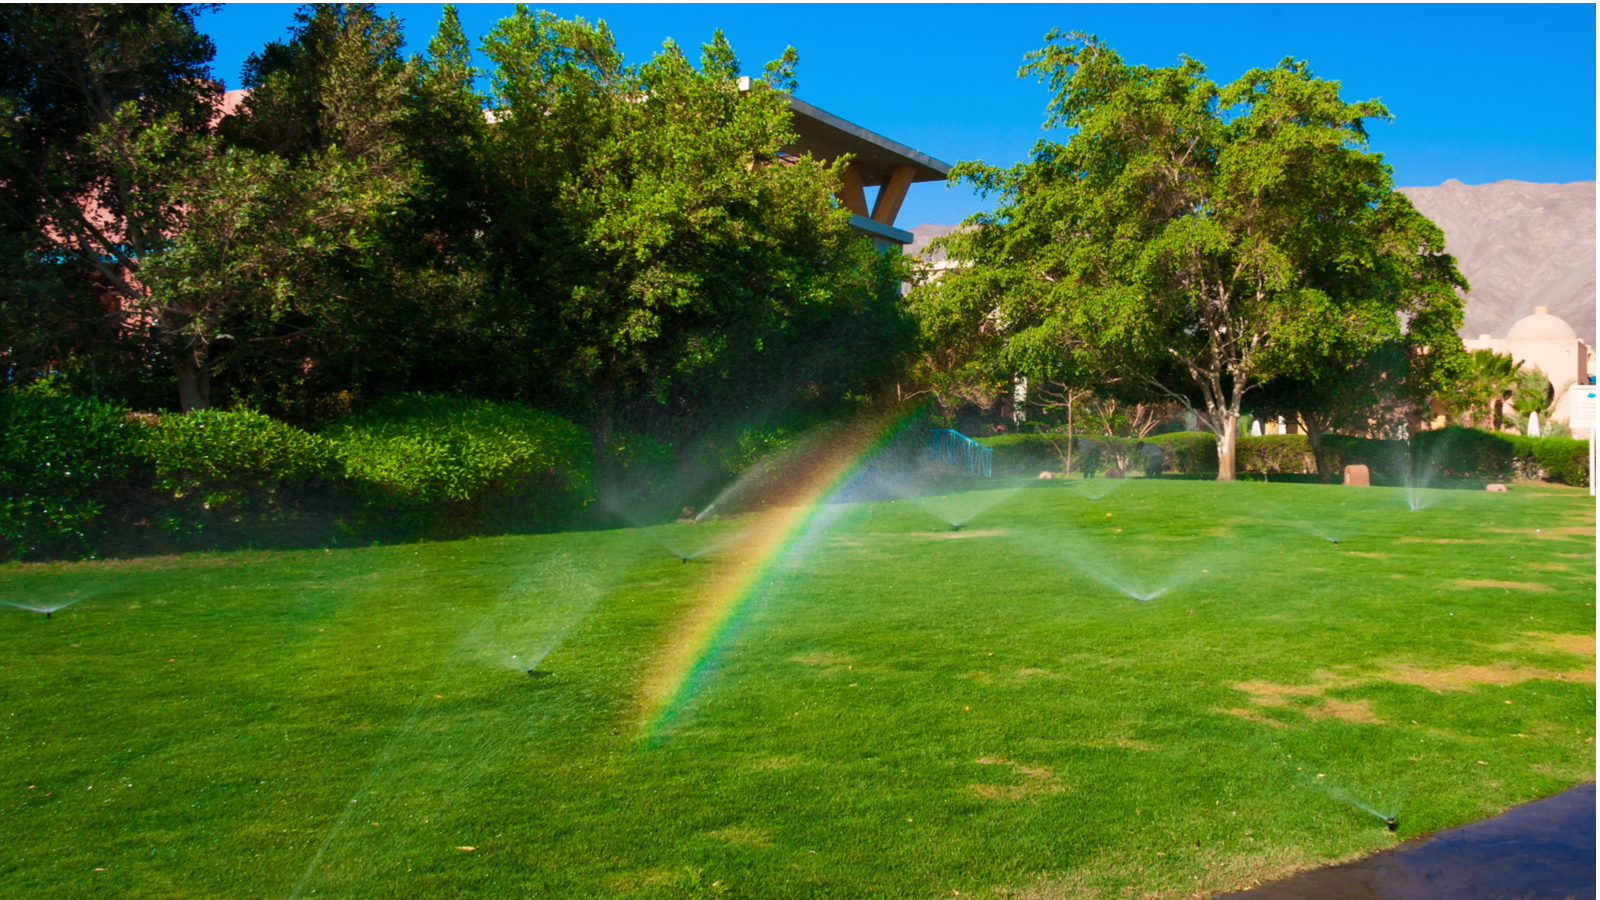 sprinkler-system-startup-Chesterfield-MO | Chesterfield, MO area sprinkler systems | Lawn Sprinklers of St. Louis